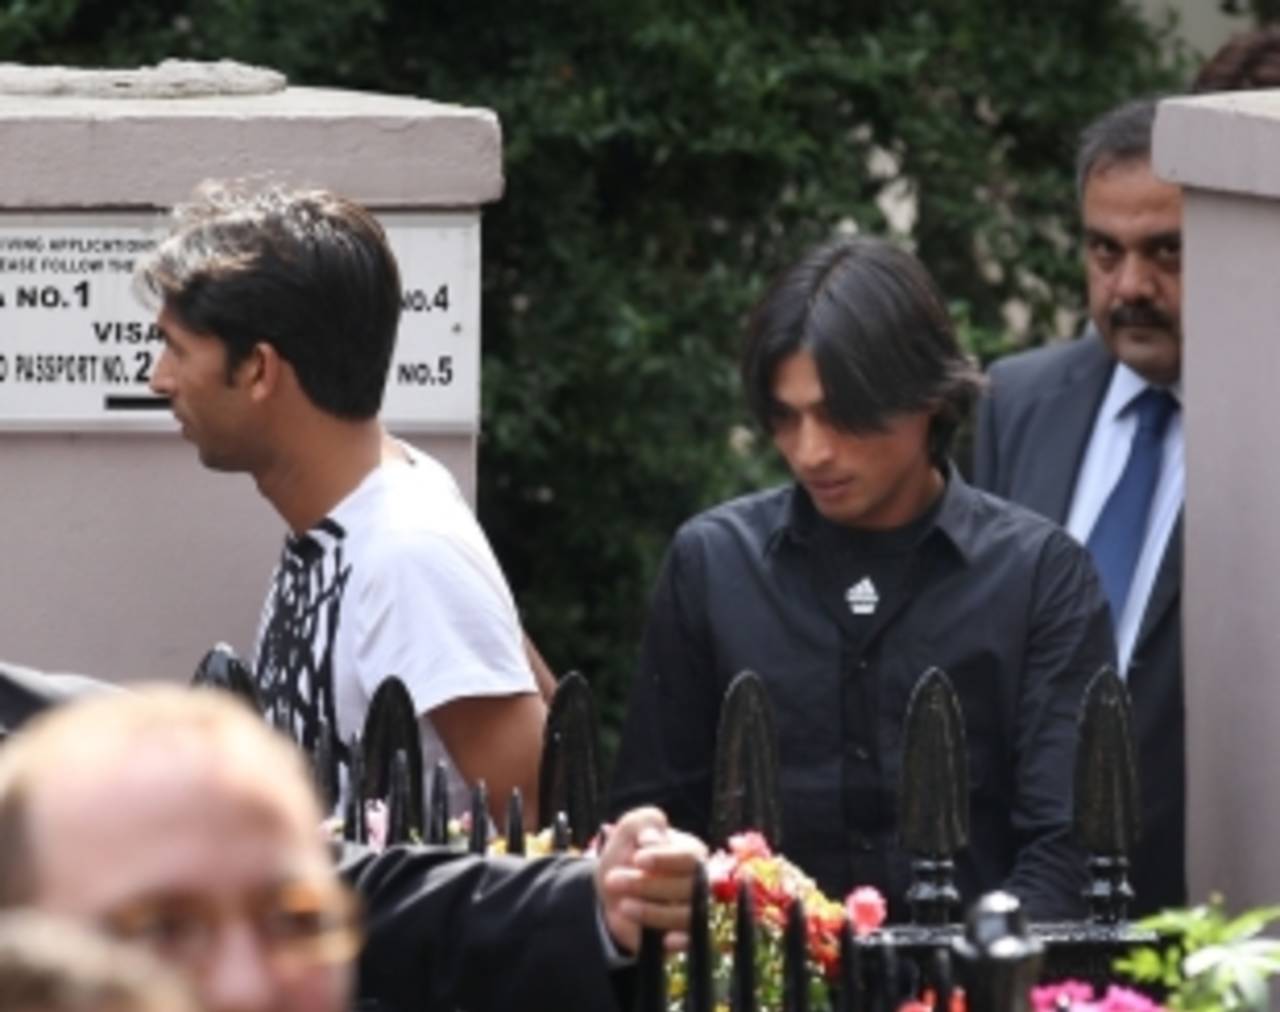 Mohammad Asif and Mohammad Amir left the Pakistan High Commission via a rear exit to avoid a throng of reporters, September 2, 2010